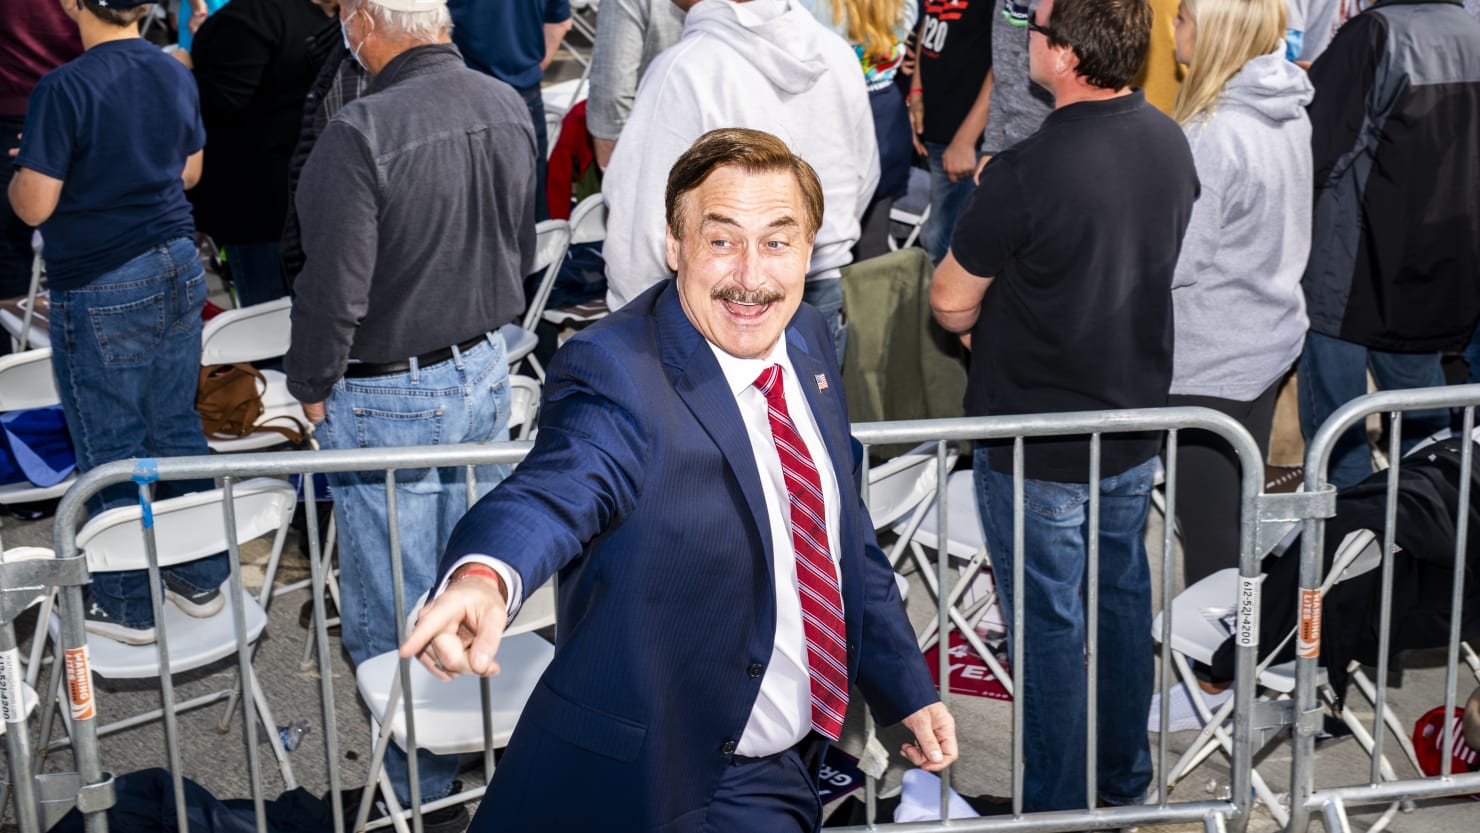 MyPillow CEO Mike Lindell, Tucker Carlson’s biggest advertiser, downloads on Fox News